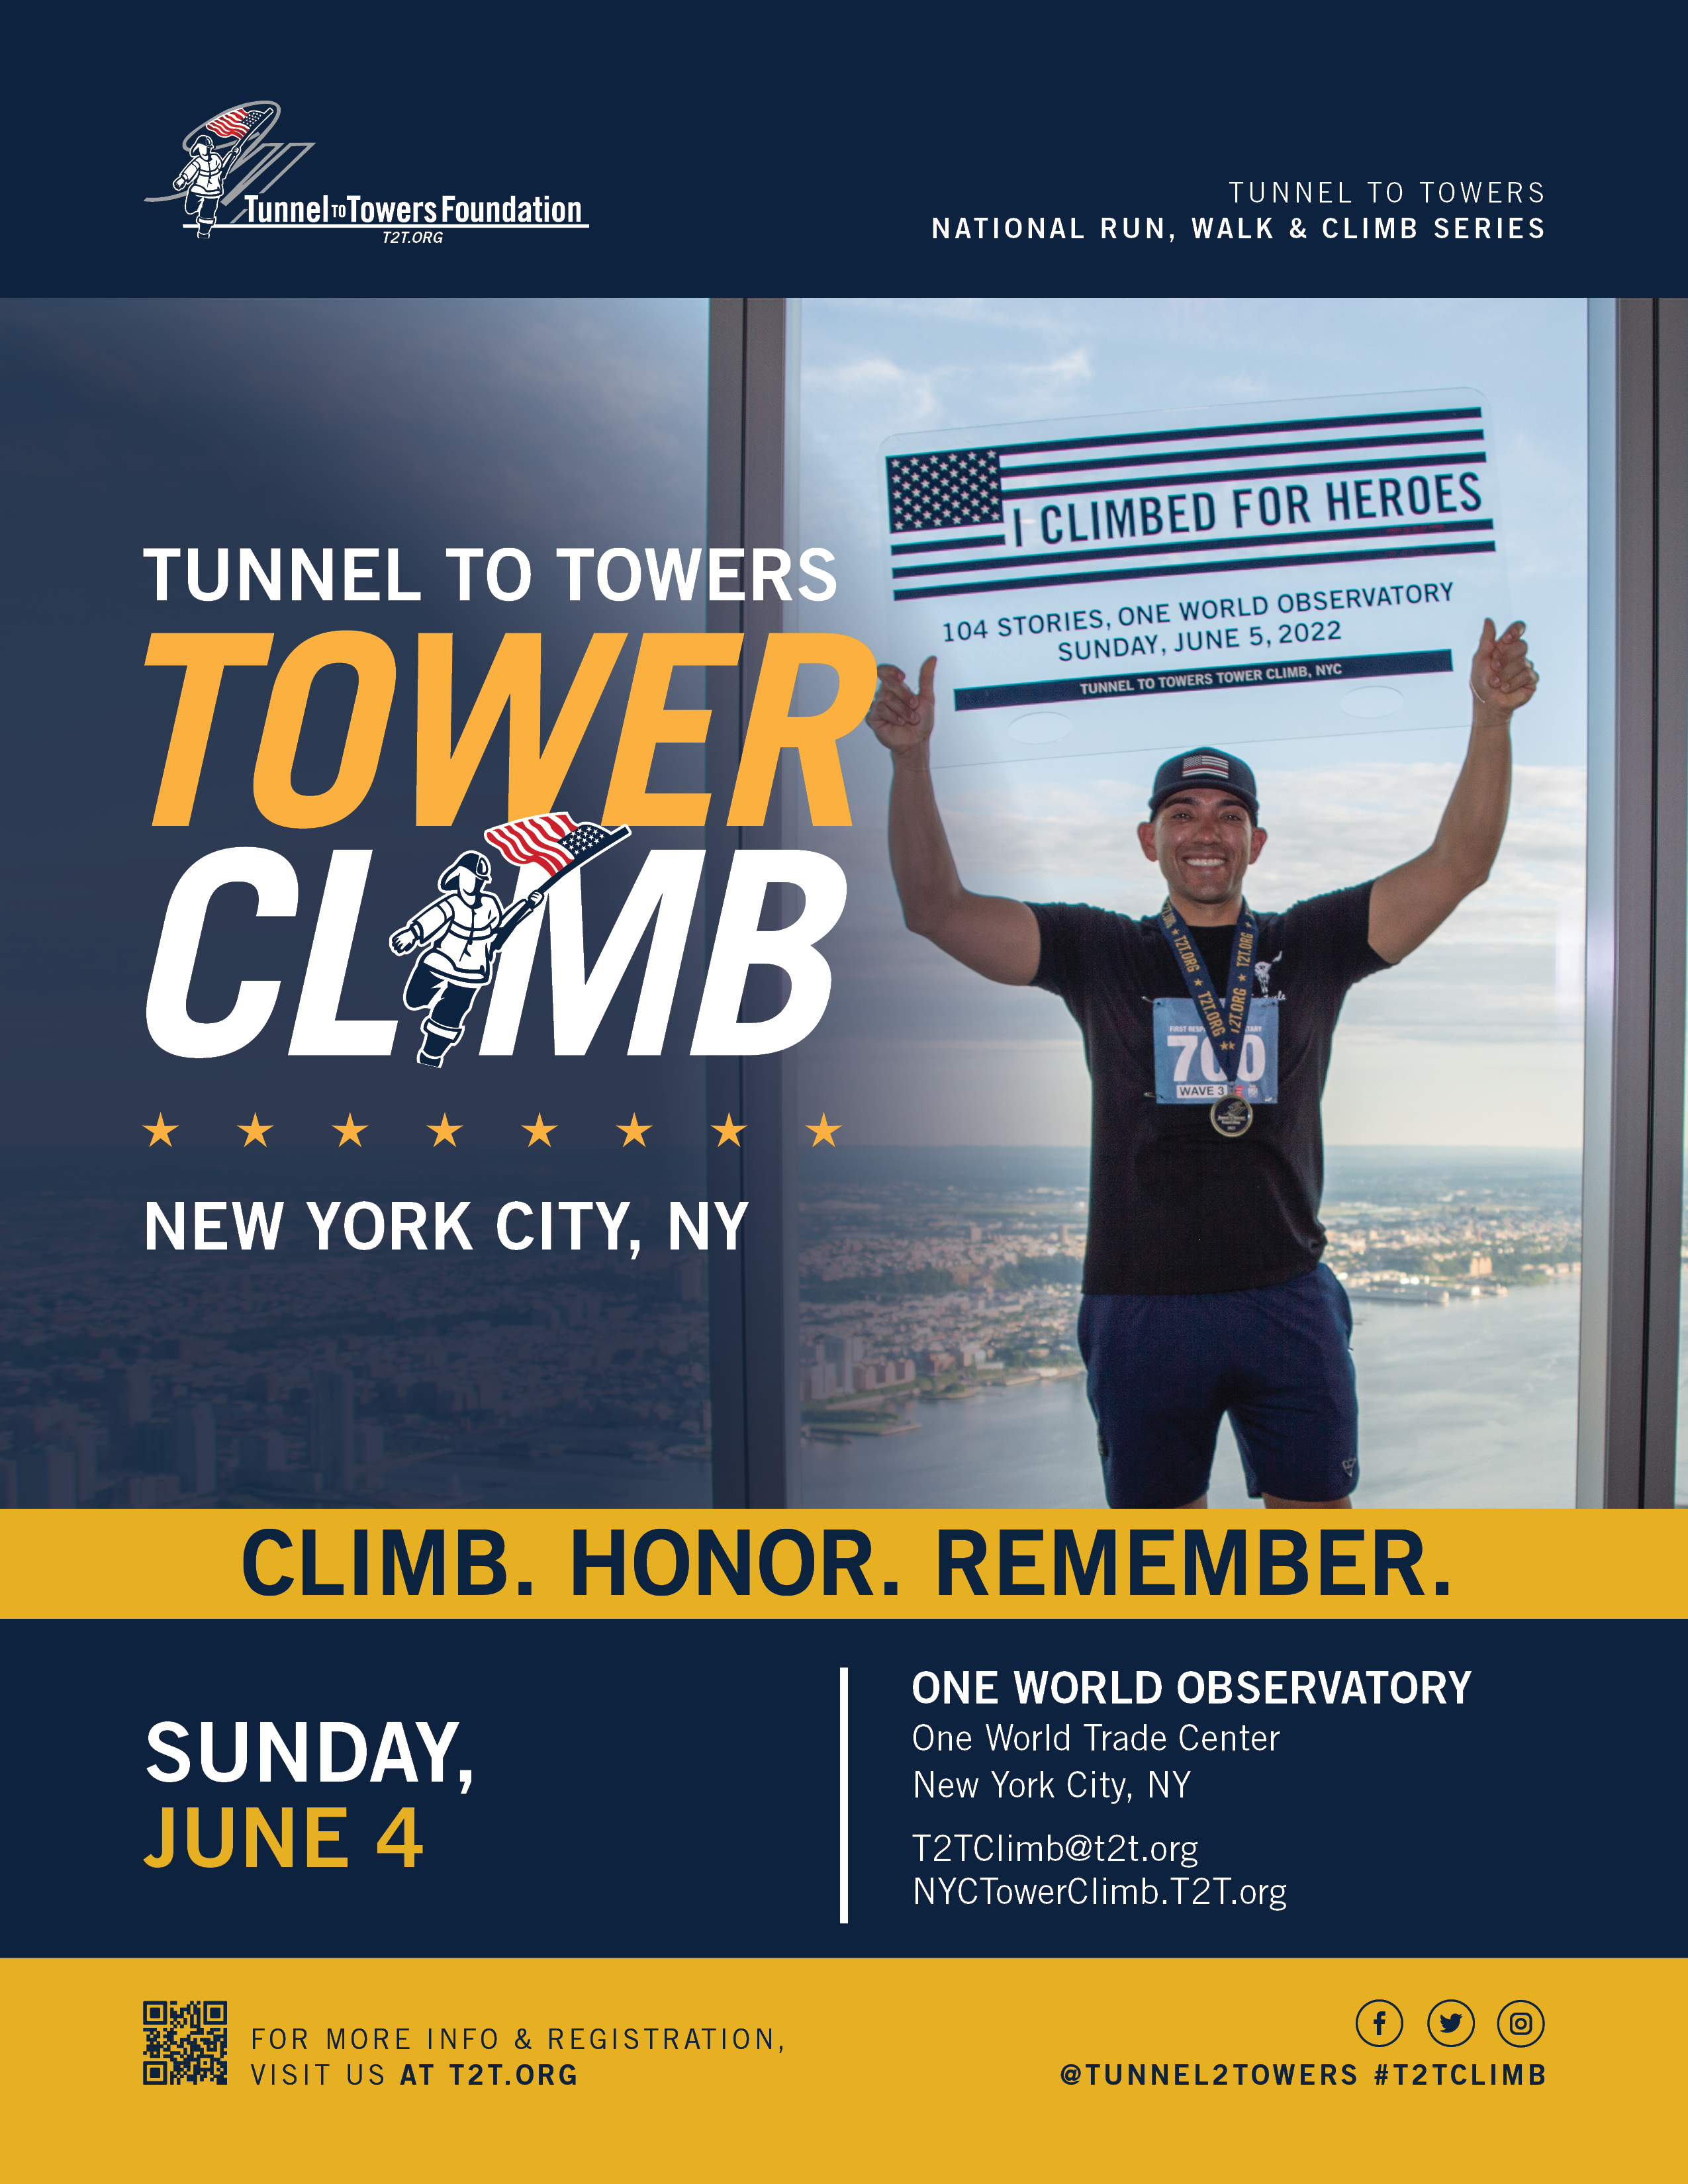 Tunnel to Towers Tower Climb New York City